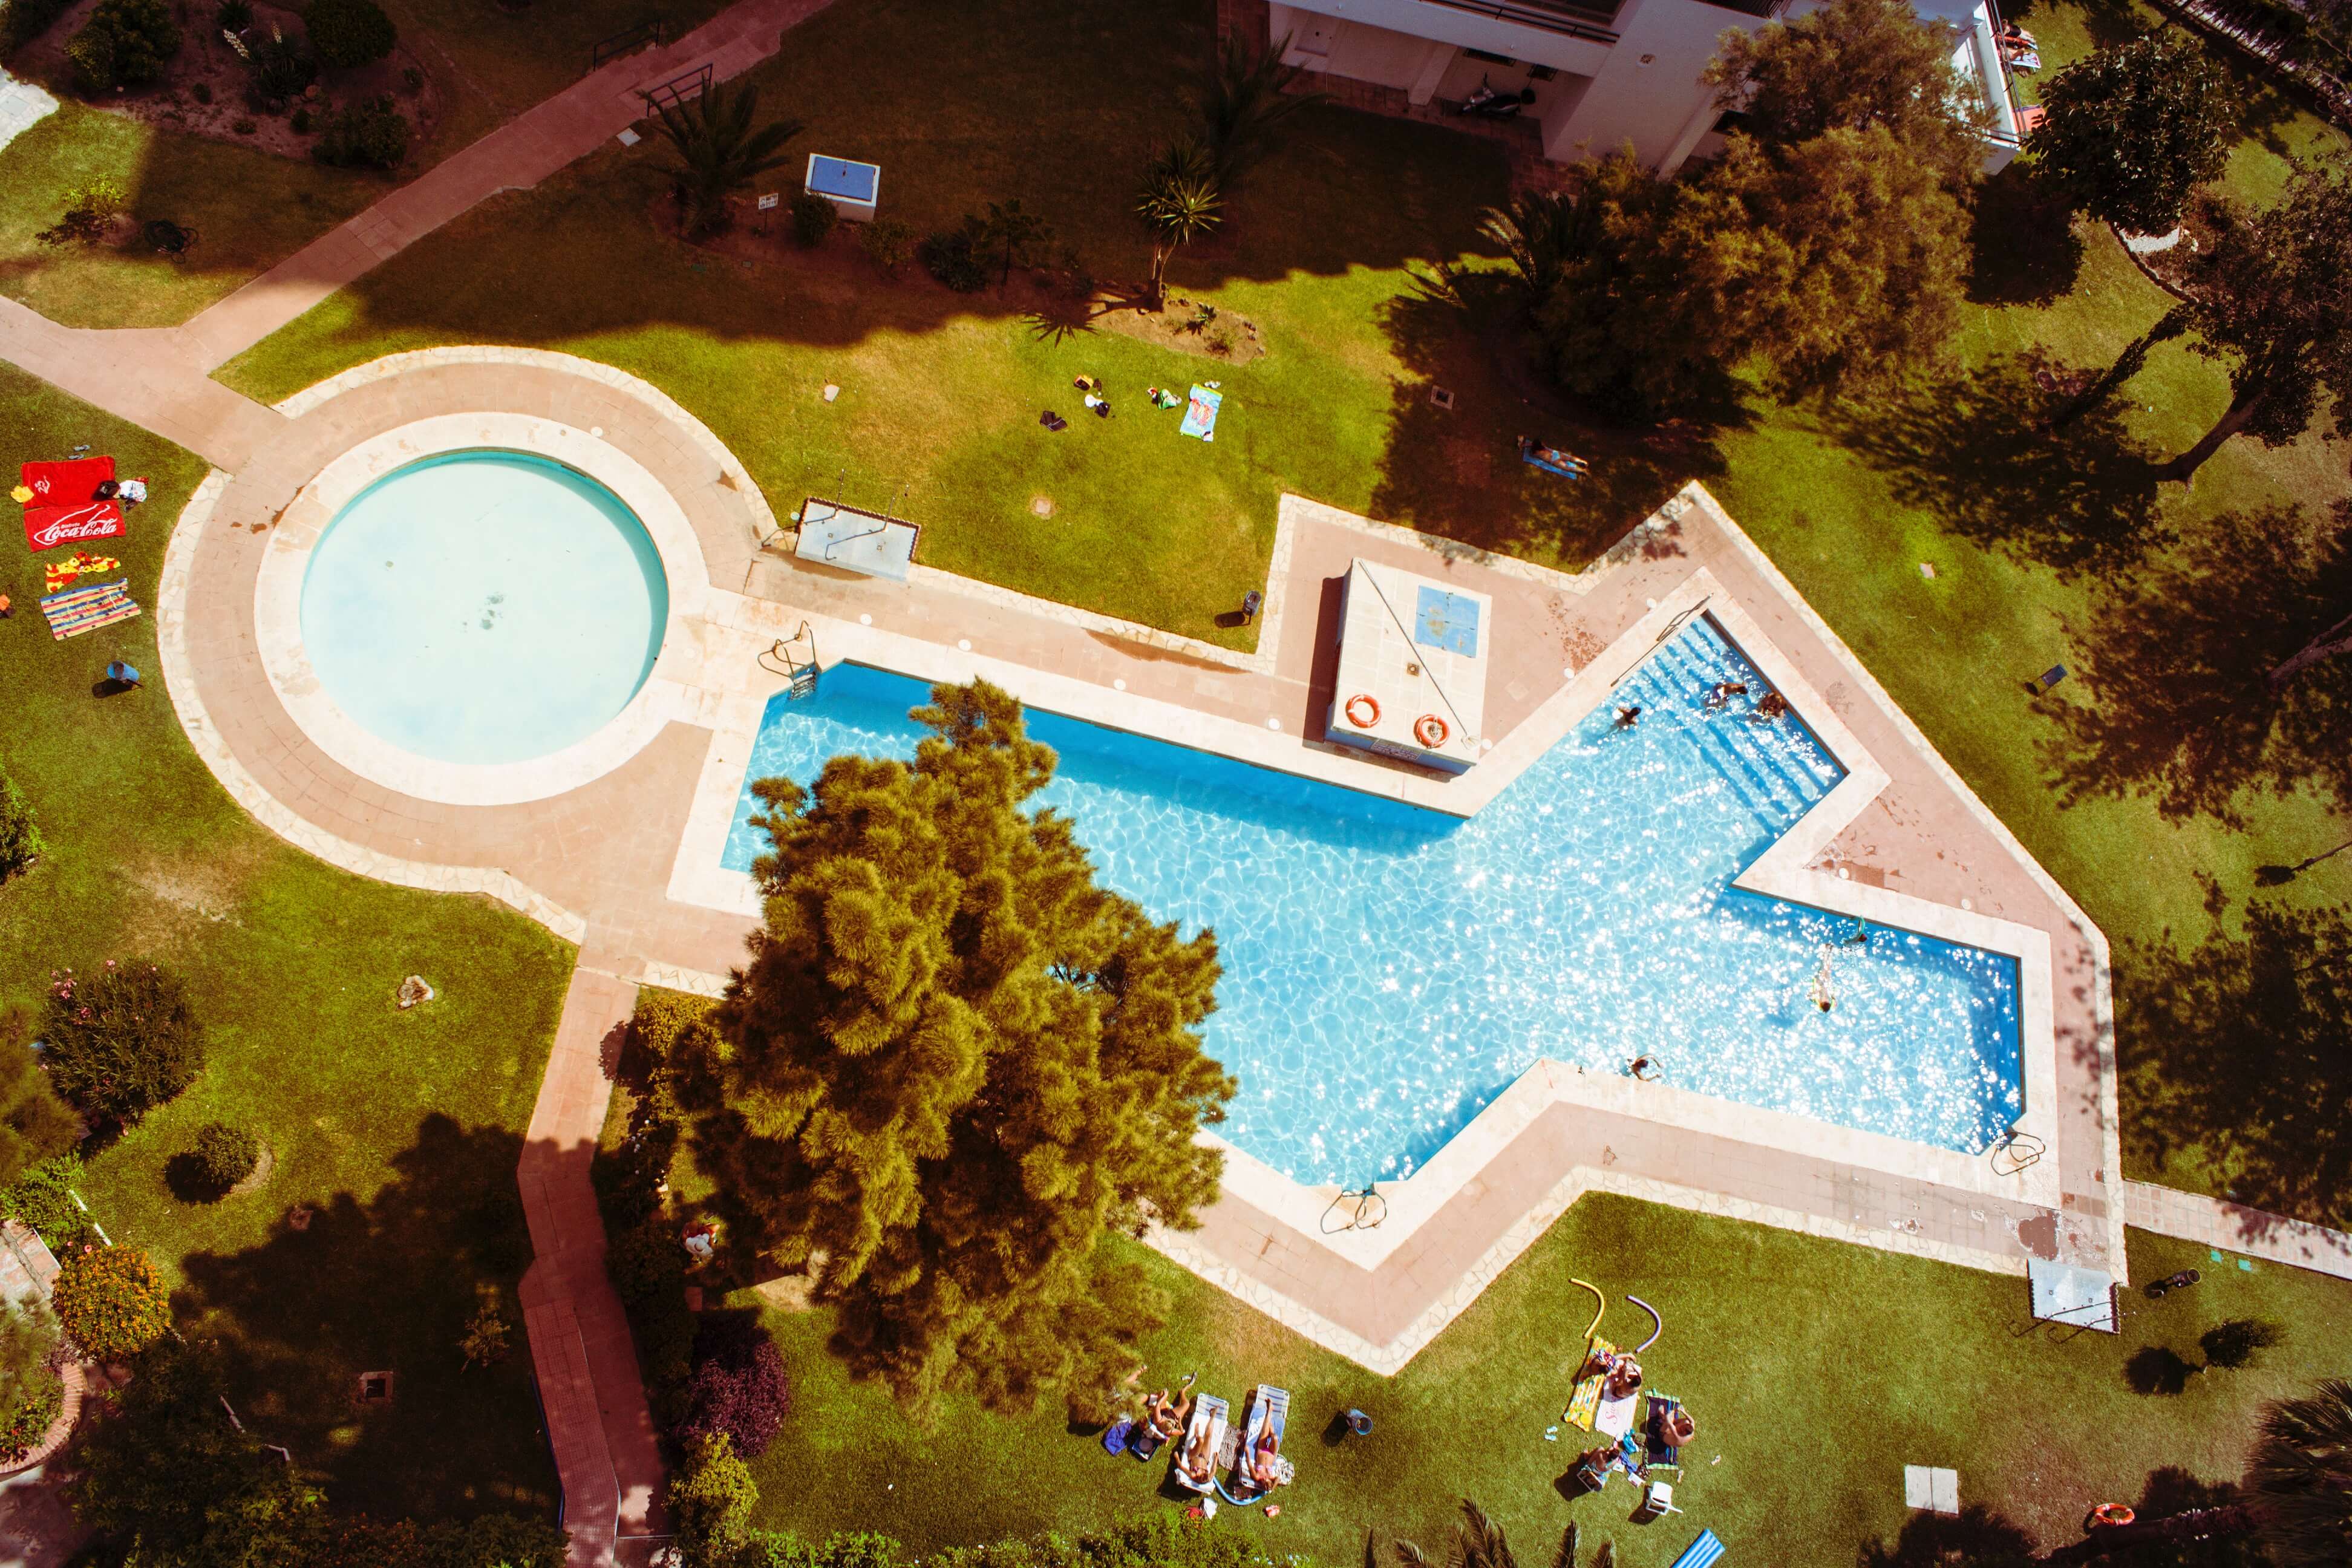 Understanding the perfect design for backyard pools.